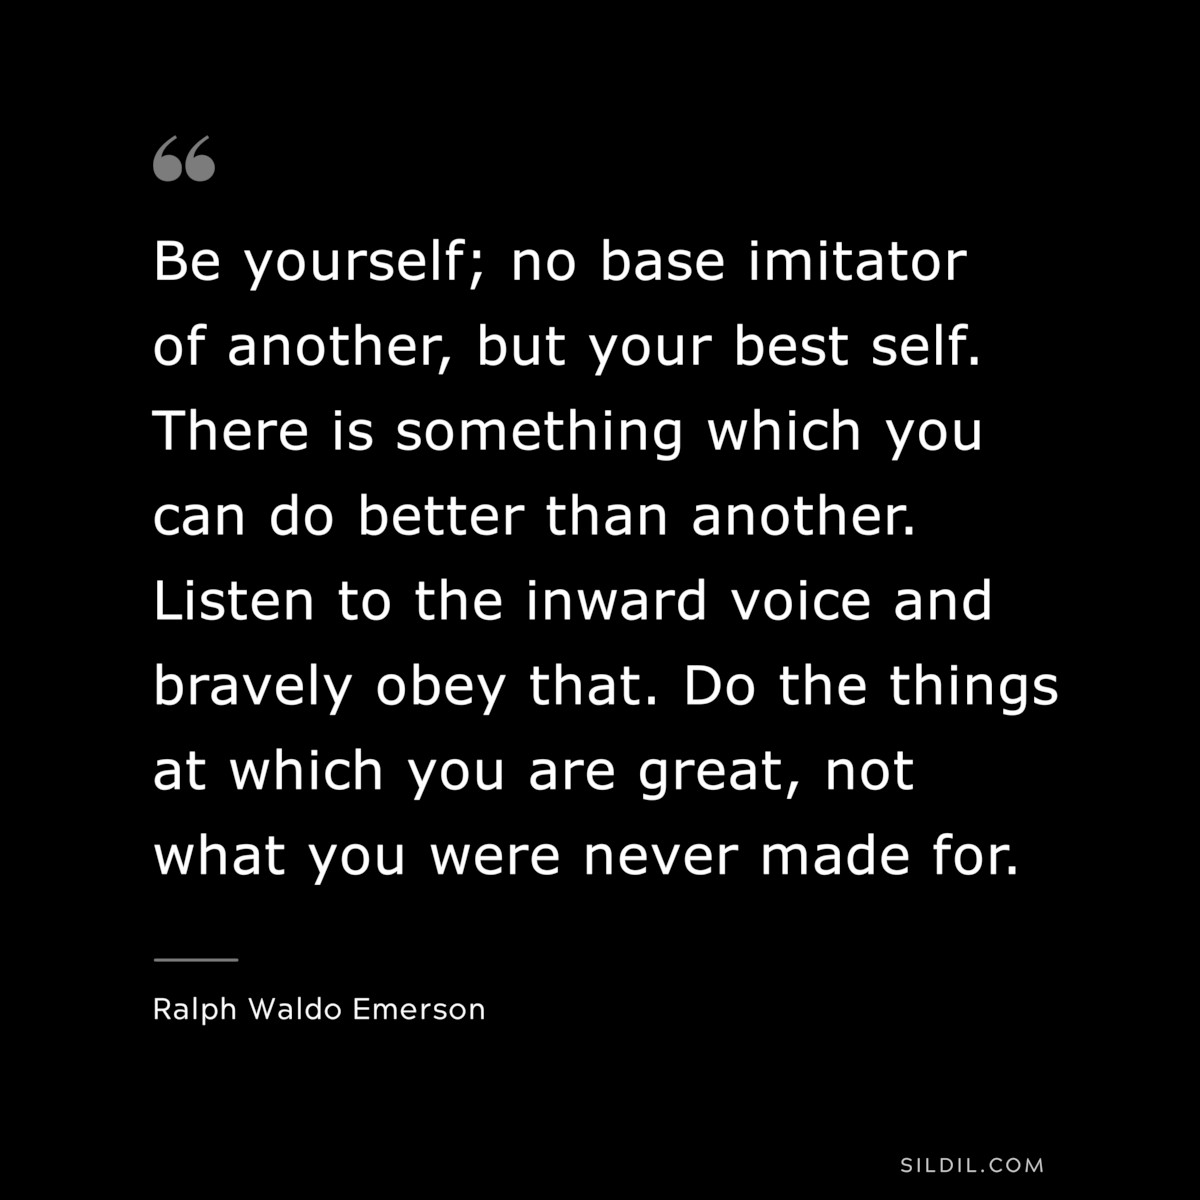 Be yourself; no base imitator of another, but your best self. There is something which you can do better than another. Listen to the inward voice and bravely obey that. Do the things at which you are great, not what you were never made for. — Ralph Waldo Emerson